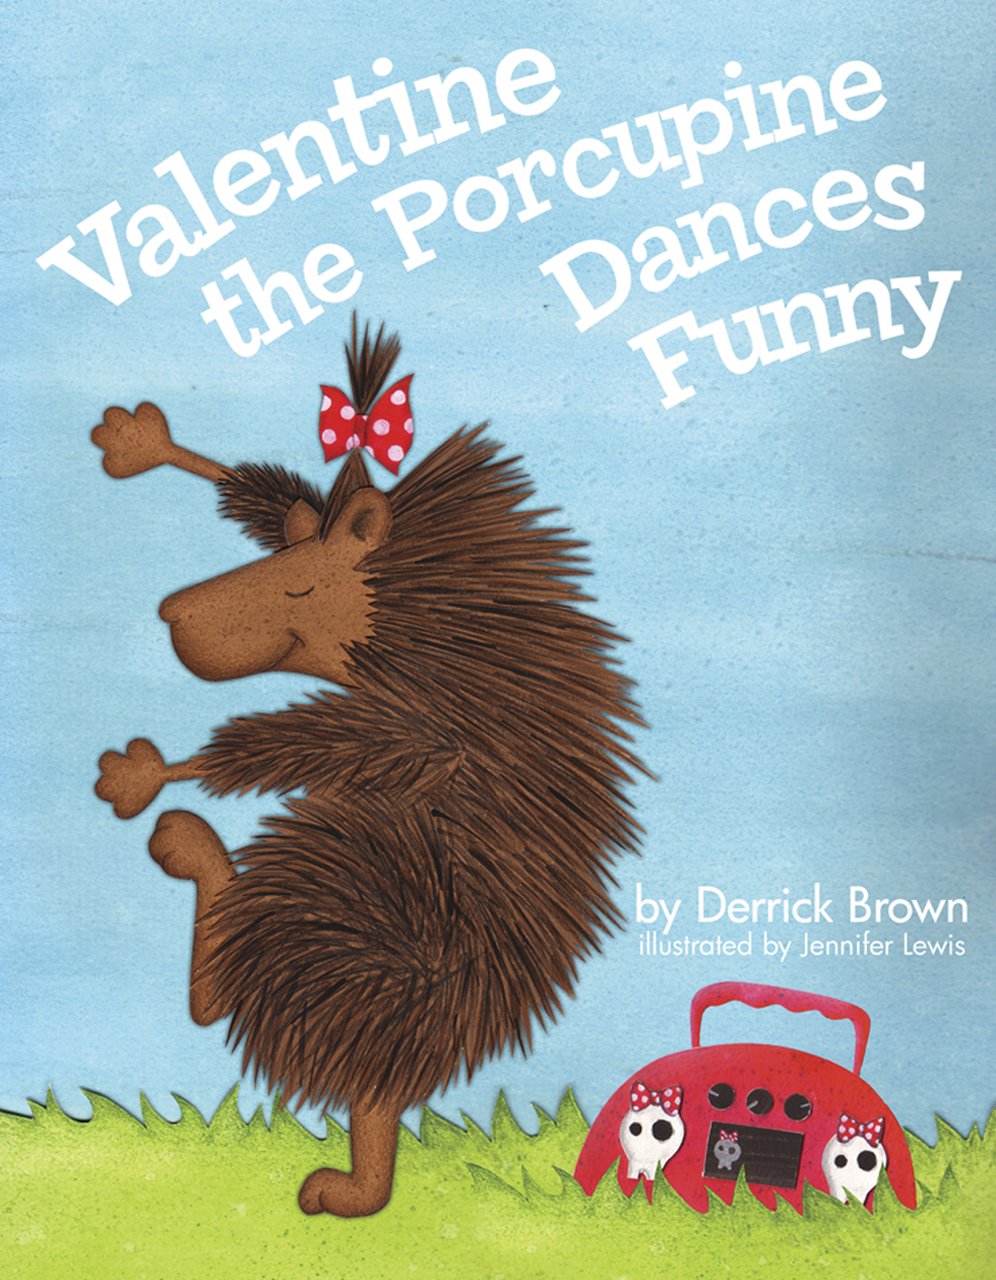 Valentine the Porcupine Dances Funny by Derrick C. Brown, Illustrated by Jennifer Lewis - Hardcover